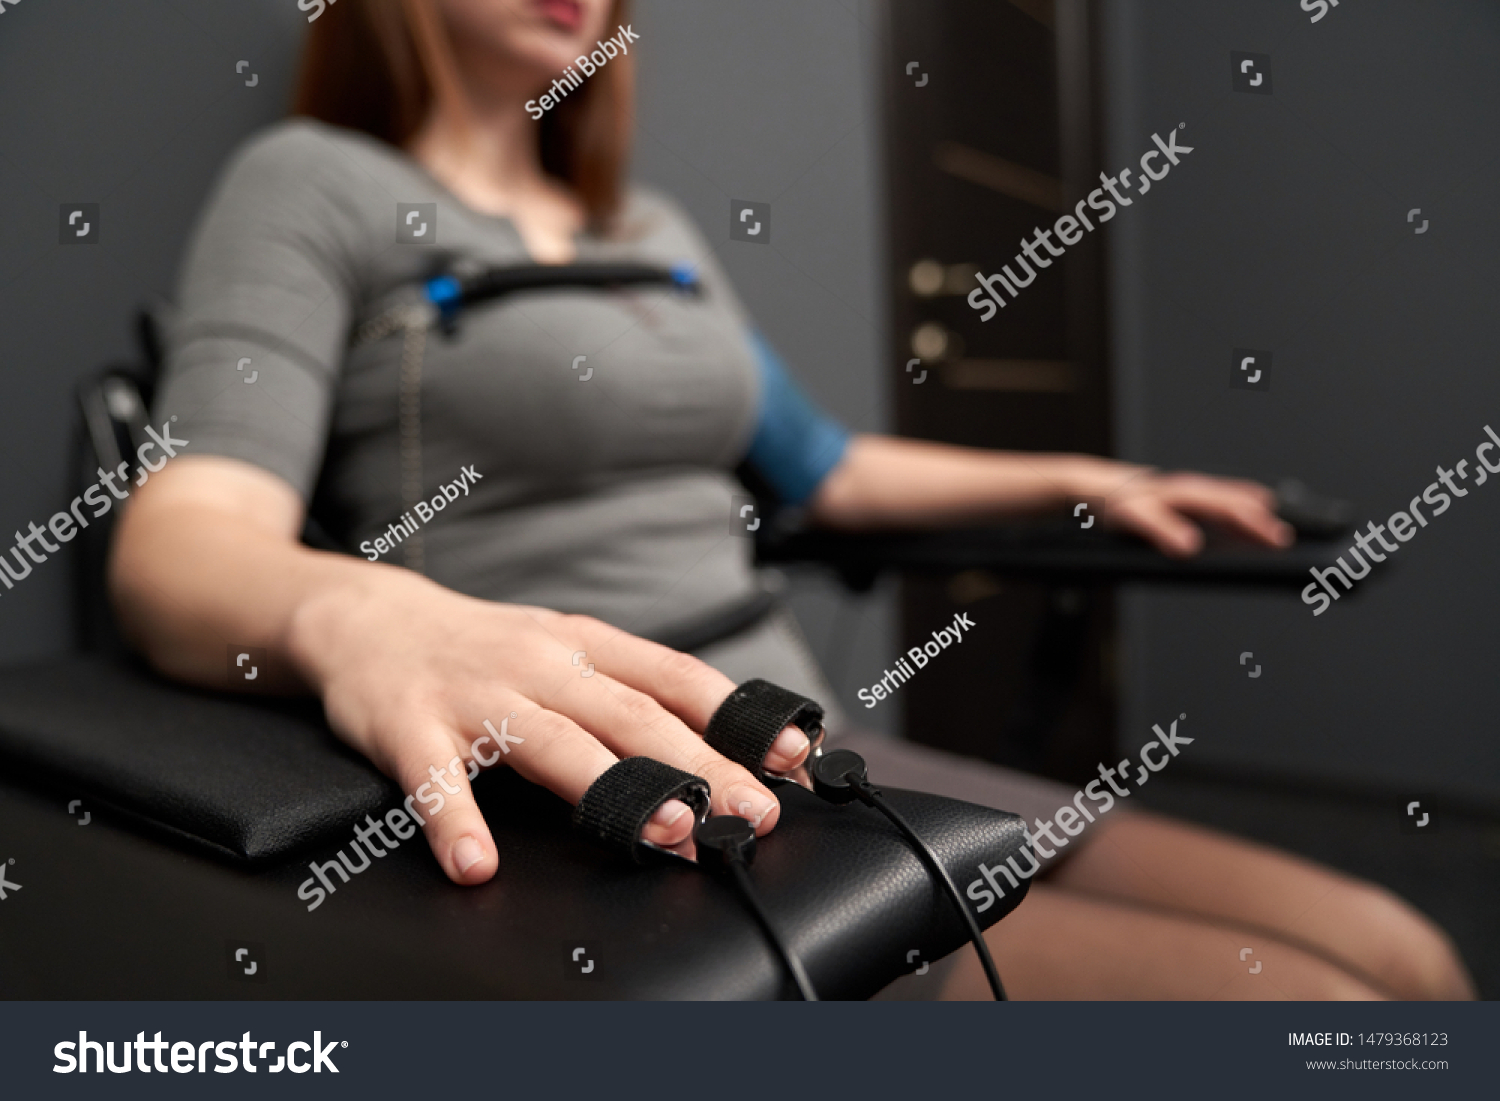 Closeup of female hand with indicators measuring pulse during lie detector test. Sincere woman in grey dress sitting in chair and answering questions. Concept of examination and inquiry. #1479368123